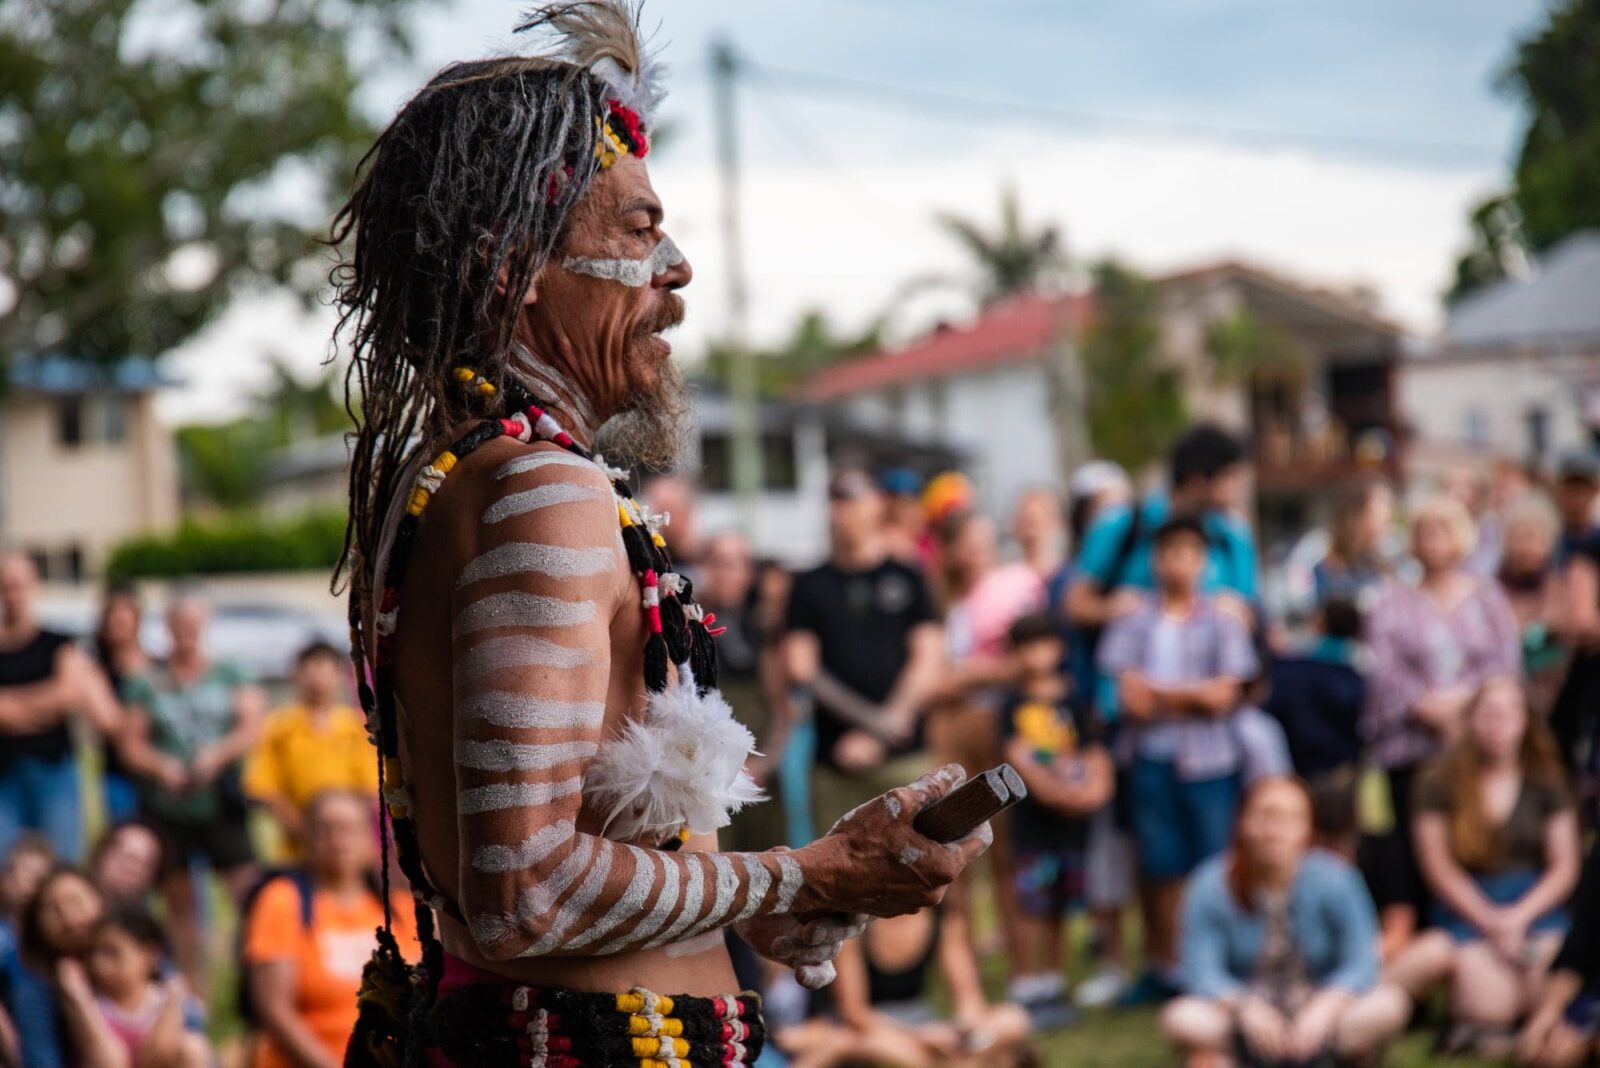 An opening ceremony tradition started by Wynnum Fringe and Quandamooka Festival